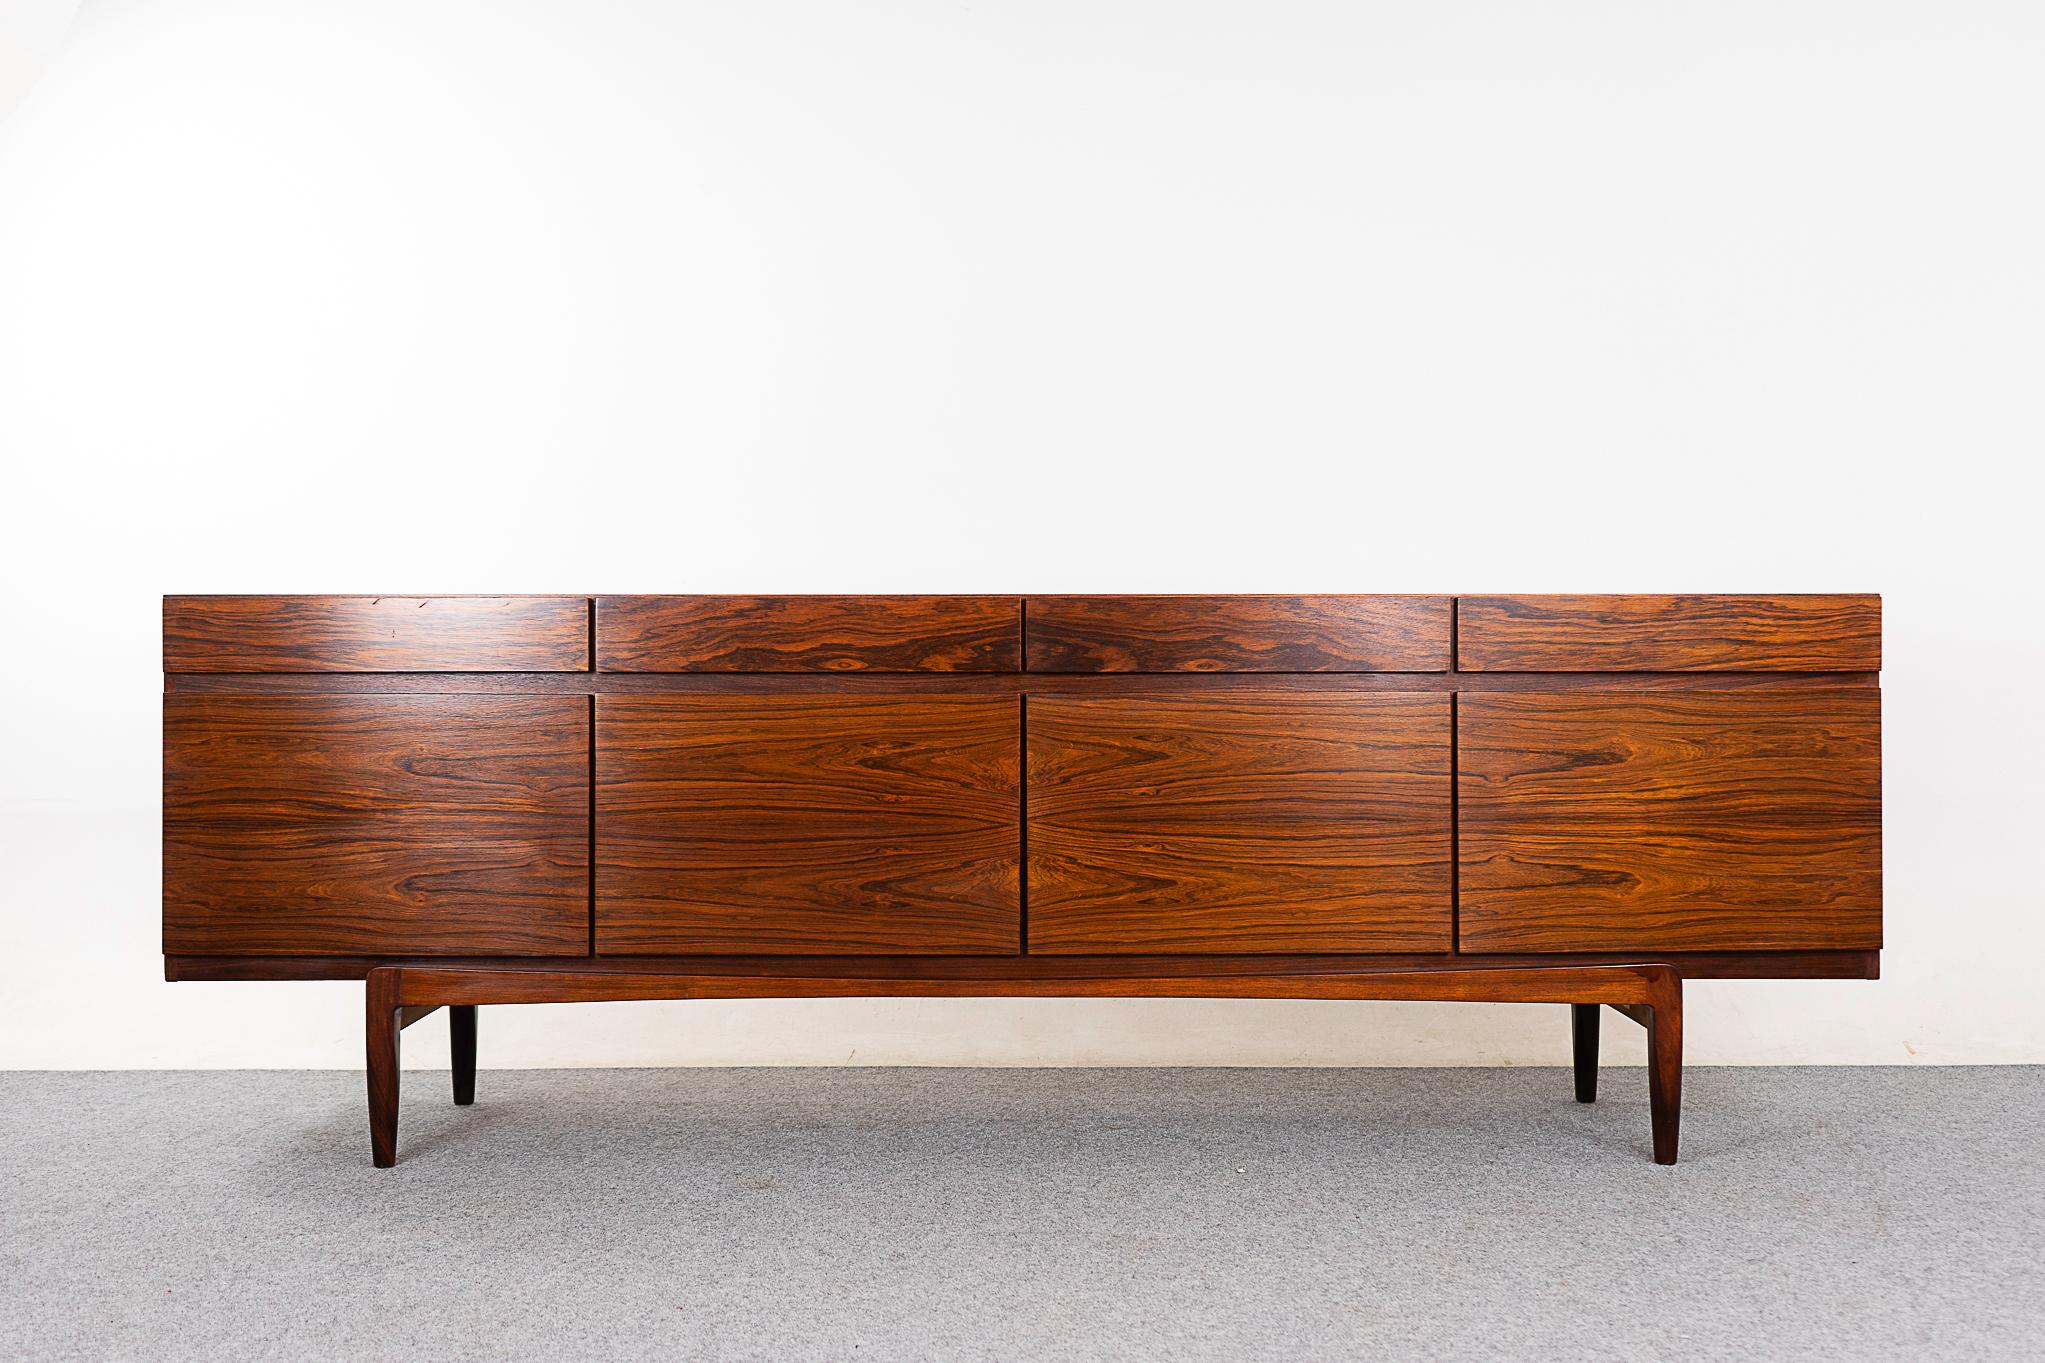 Rosewood model Fa-66 sideboard by Ib Kofod Larsen for Faarup Mobelfabrik, circa 1960's. Substantial, sleek, minimalist design with exquisite book-matched veneer! Ample adjustable shelving and a bank of felt lined interior slim drawers with mortise